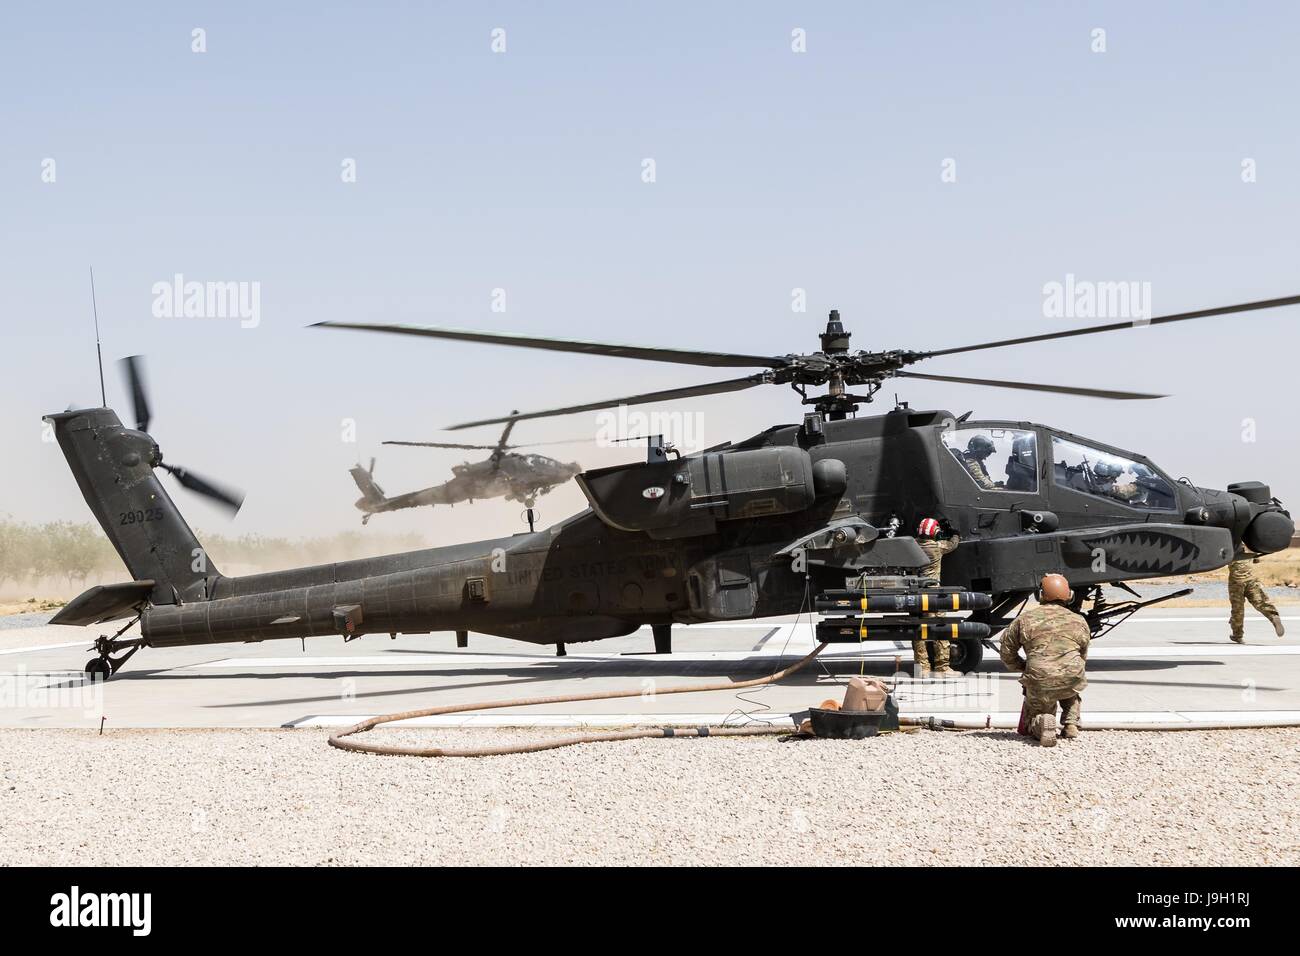 U.S. Army AH-64E Apache attack helicopters assigned to Task Force Griffin, 16th Combat Aviation Brigade, reloads weapons and fuel before departing on a mission in support of Operation Resolute Support May 31, 2017 in Kunduz, Afghanistan. Kunduz has seen increased Taliban activity as more than 8,000 American troops and 6,000 from NATO and allied countries continue to assist the government. Stock Photo